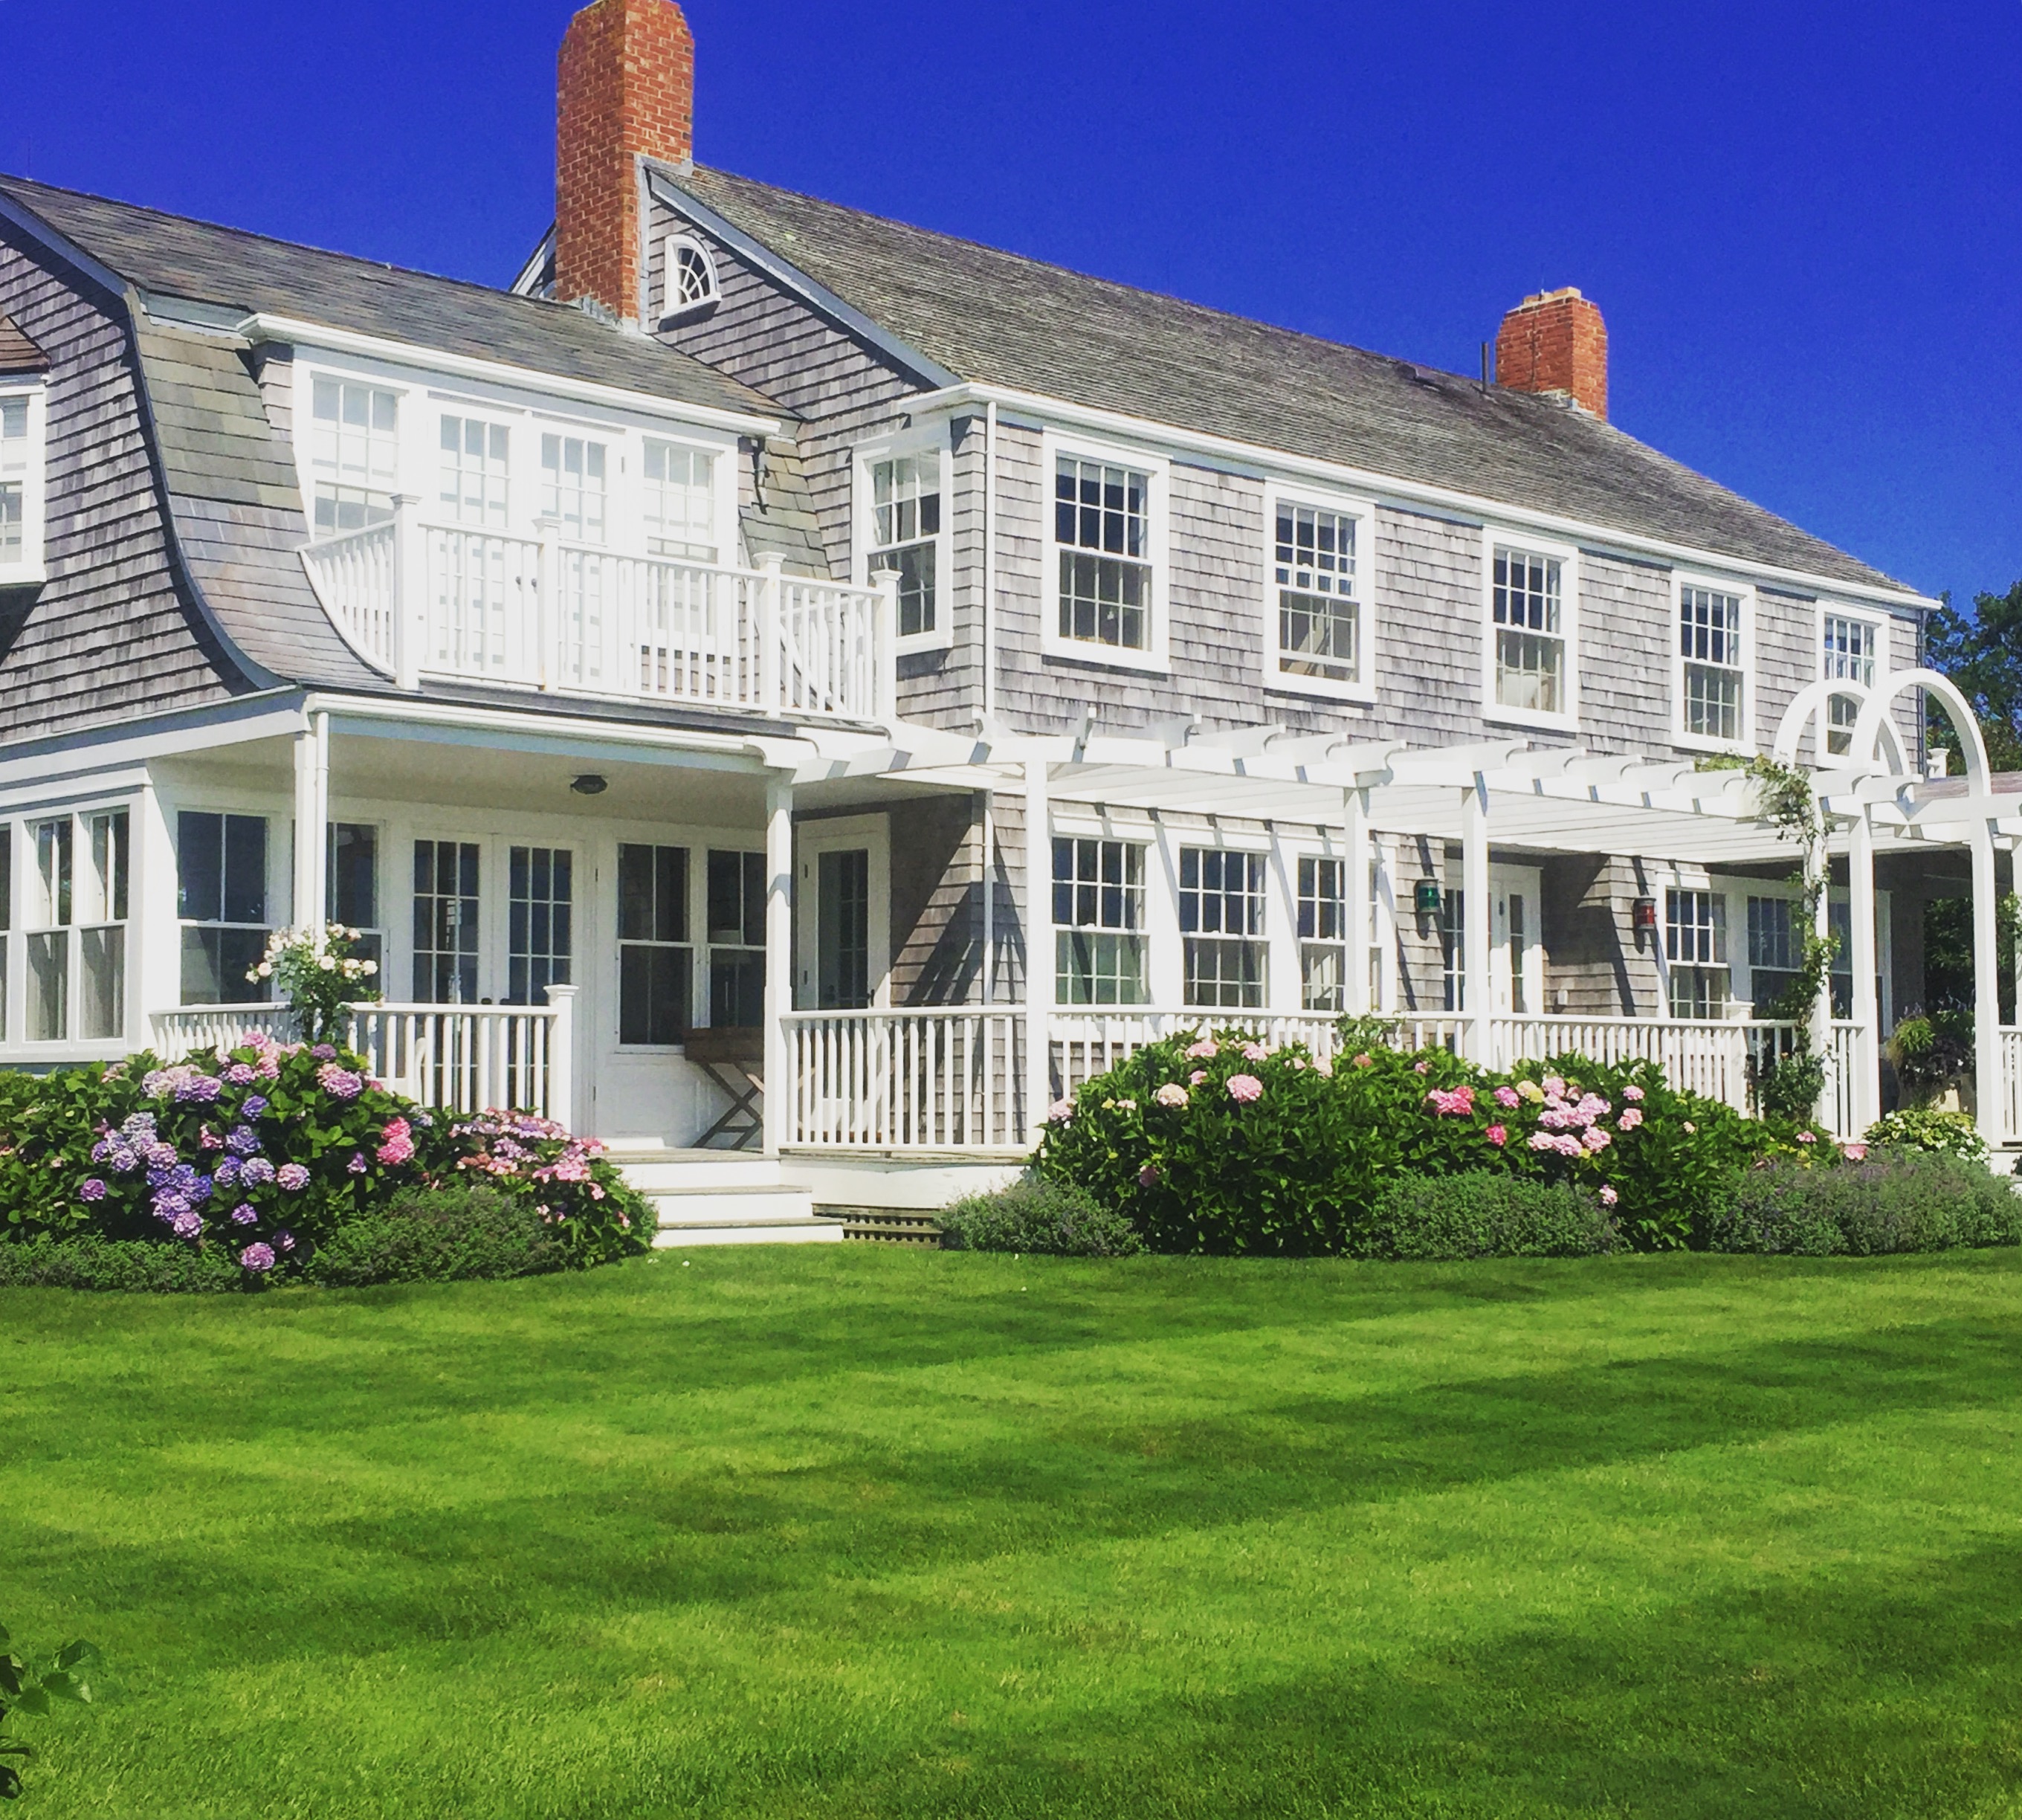 Photos of Nantucket by Christina Dandar for The Potted Boxwood 10